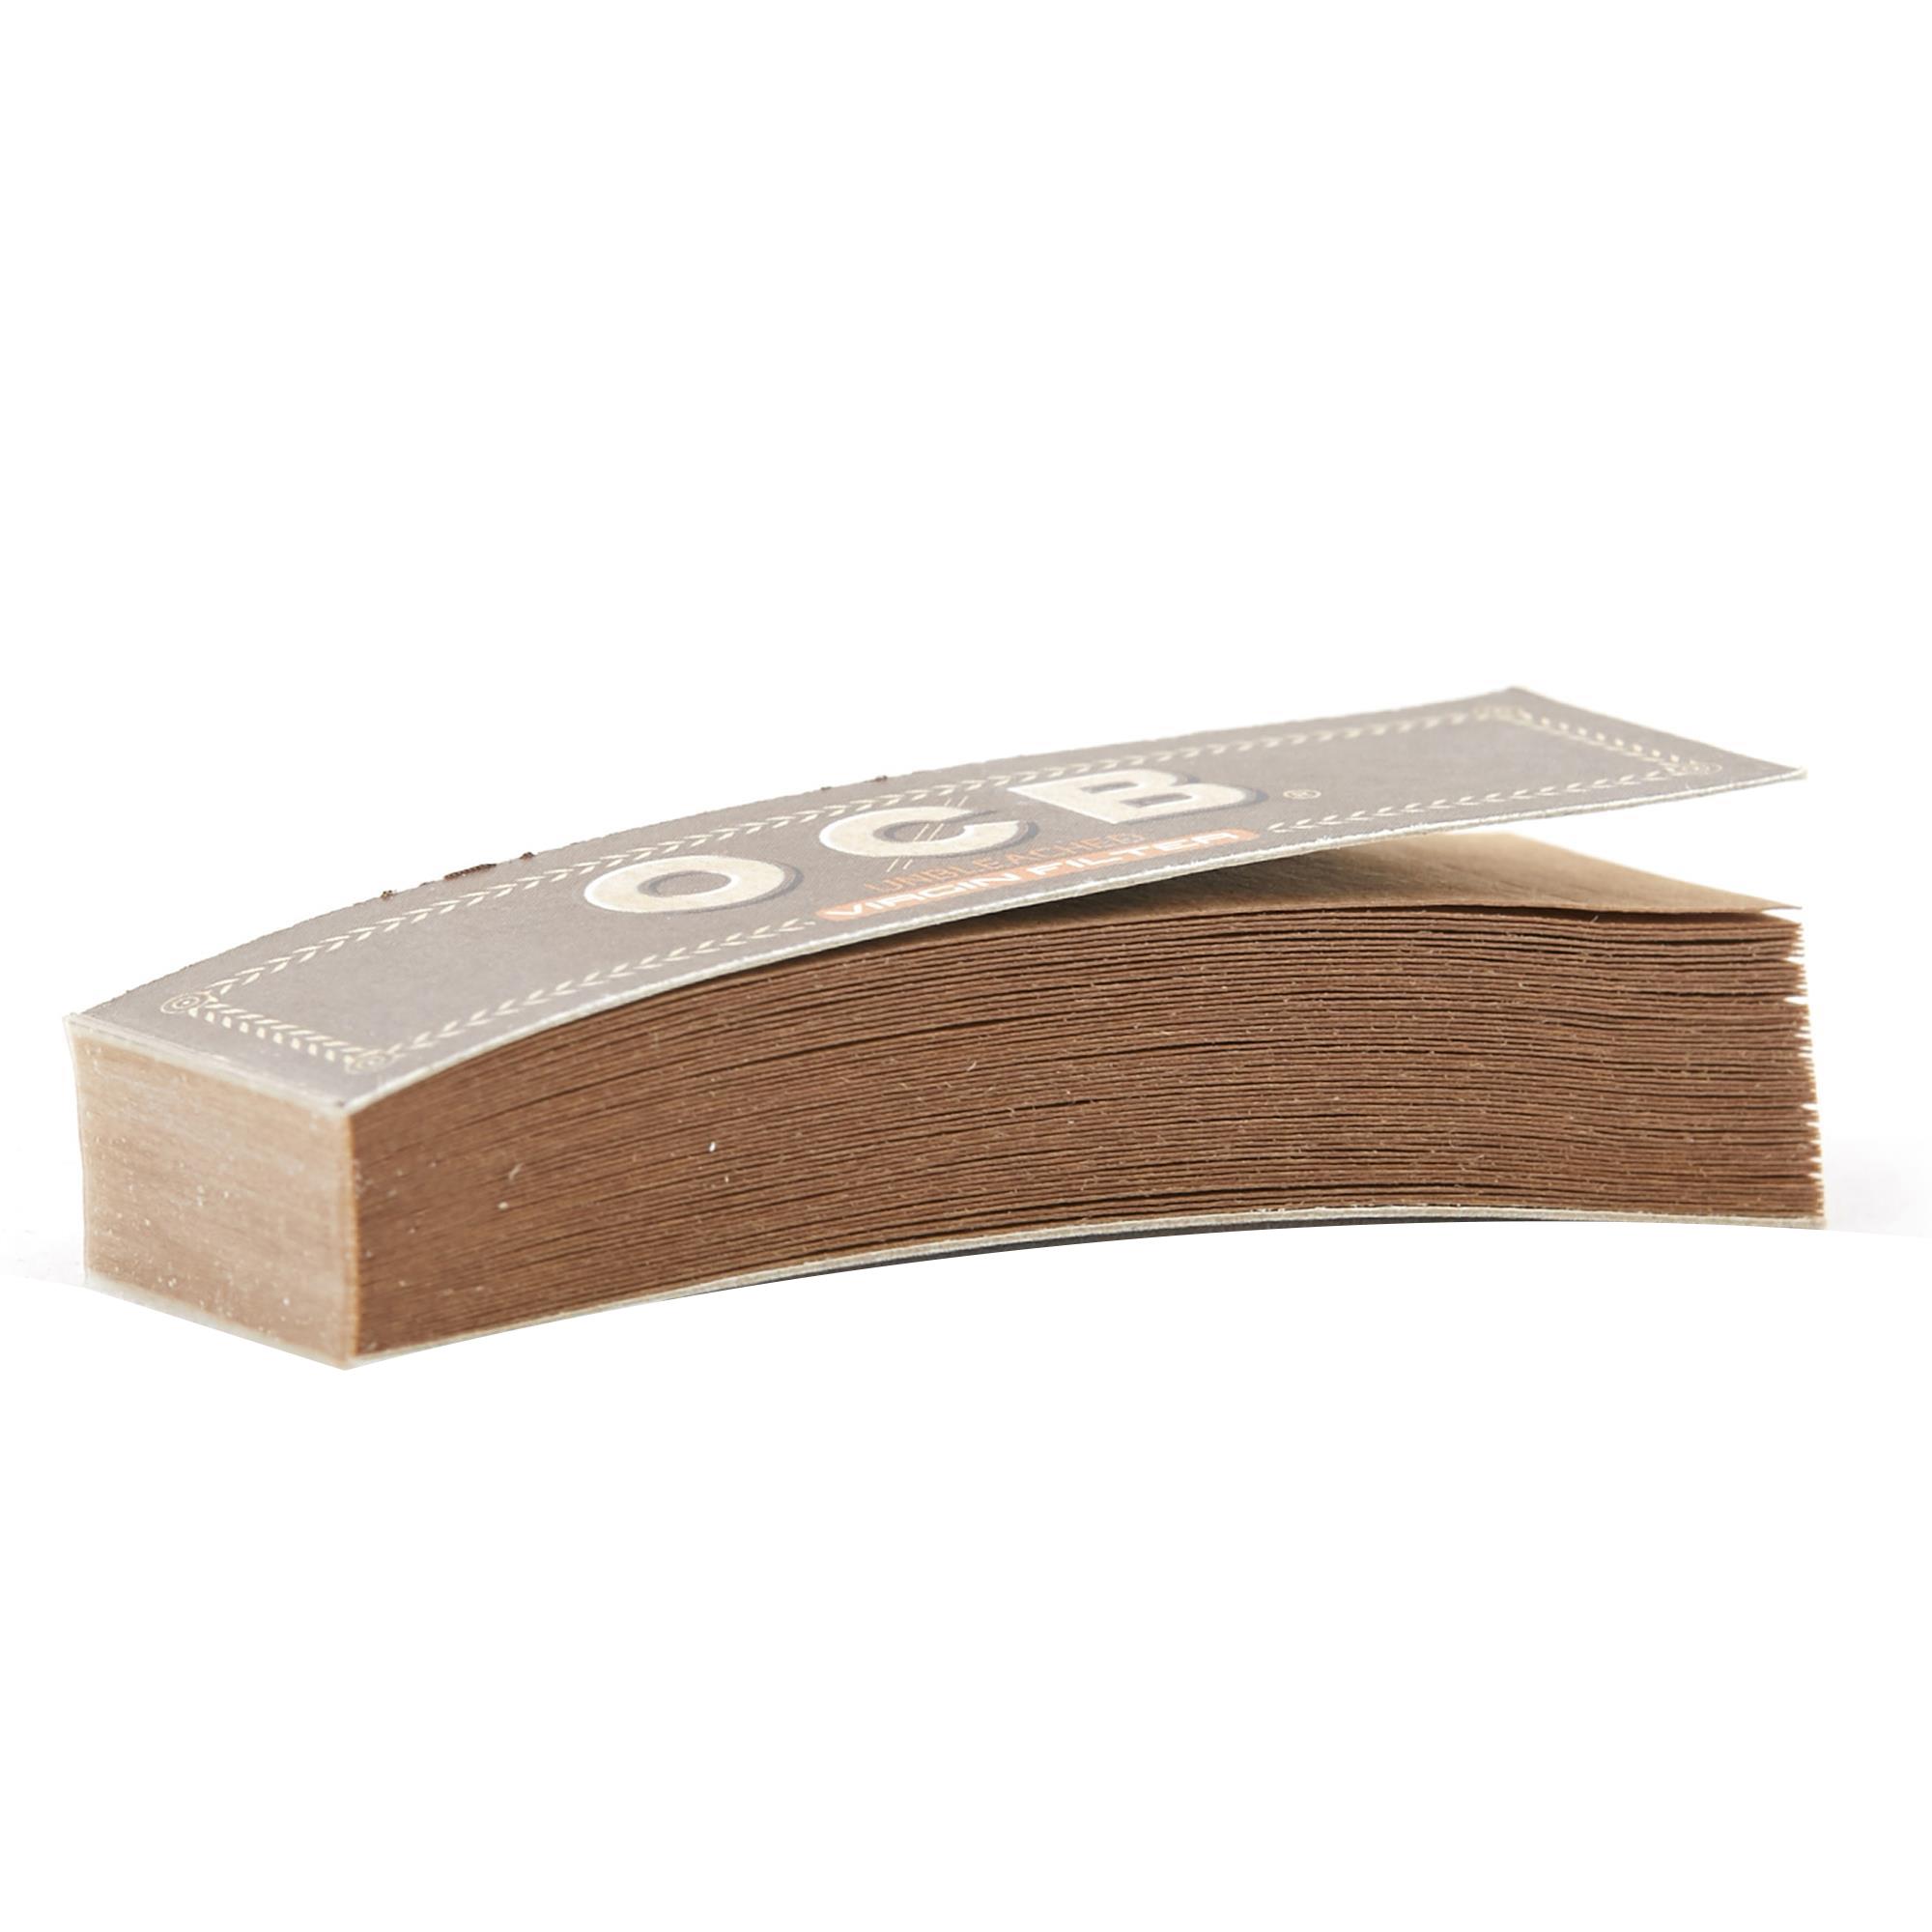 OCB UNBLEACHED PERFORATED TIPS